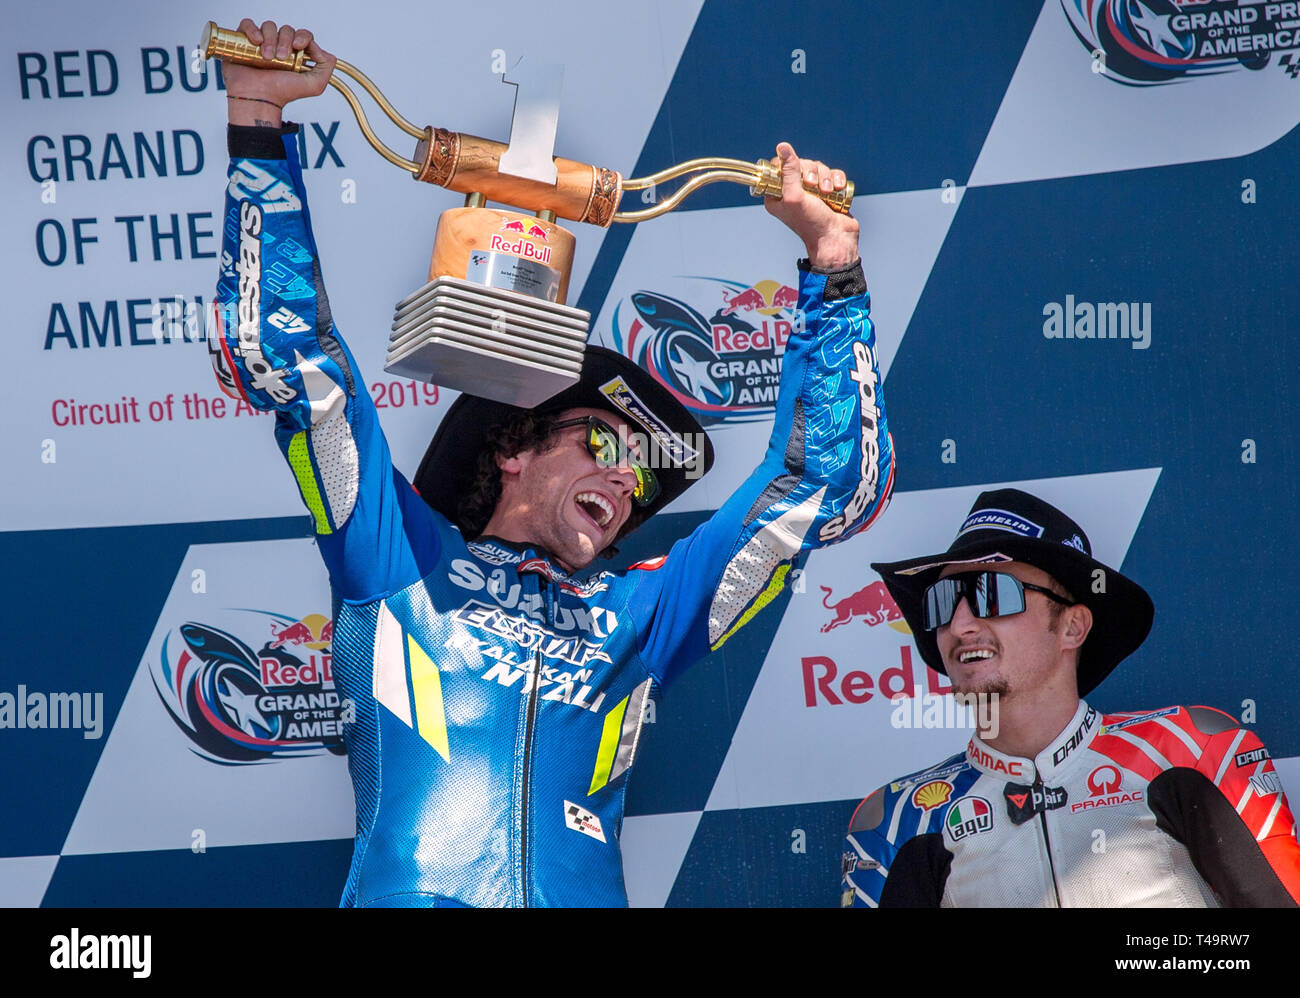 Austin, Texas, USA. 14th Apr, 2019. 3rd Place JACK MILLER (right) watches  as 1st place ALEX RINS celebrates with the winner's trophy after the MotoGP  Red Bull Grand Prix of the Americas